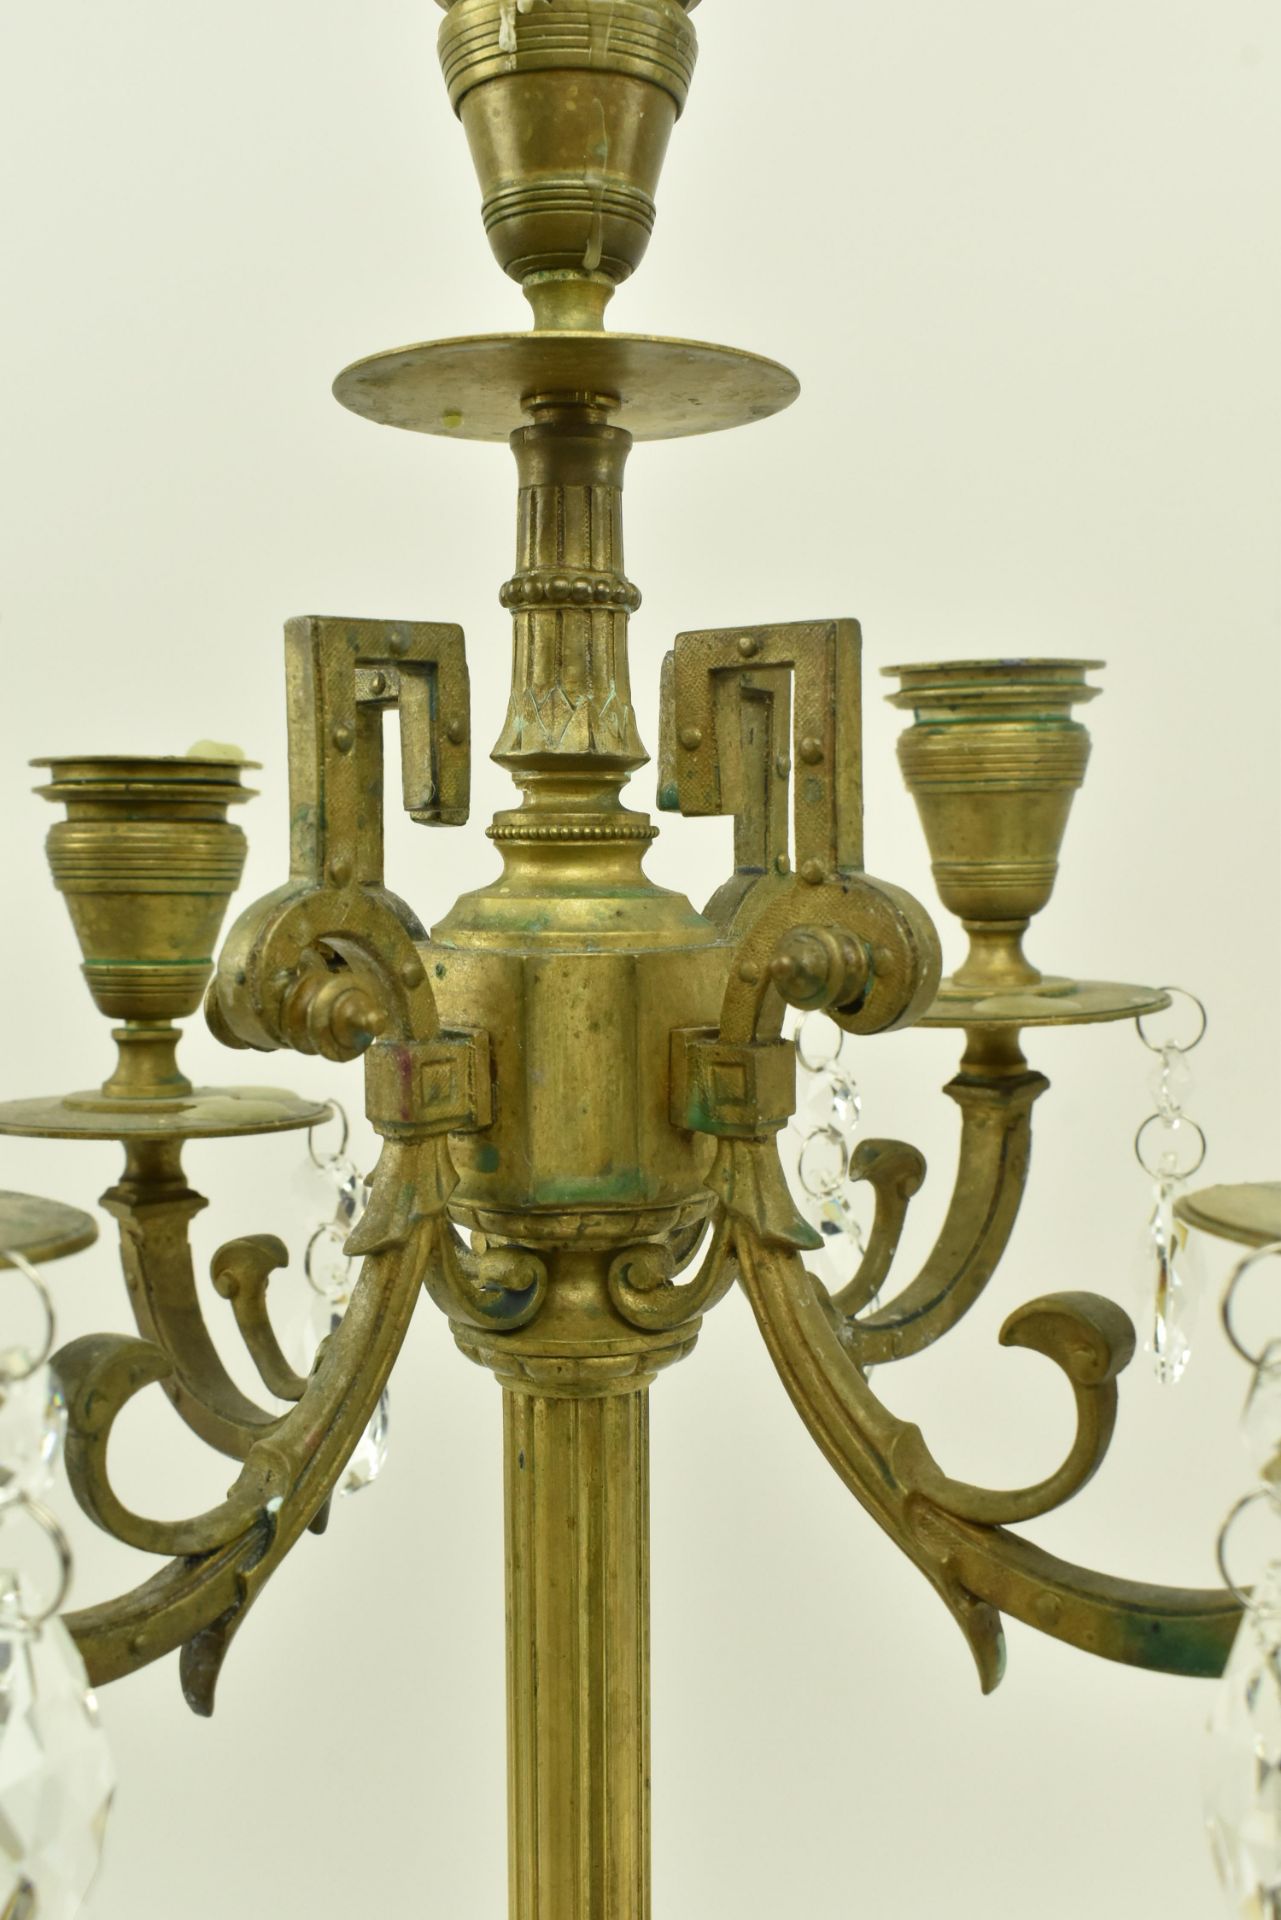 PAIR OF FRENCH INSPIRED BRASS DESK TABLE CANDELABRAS - Image 3 of 6